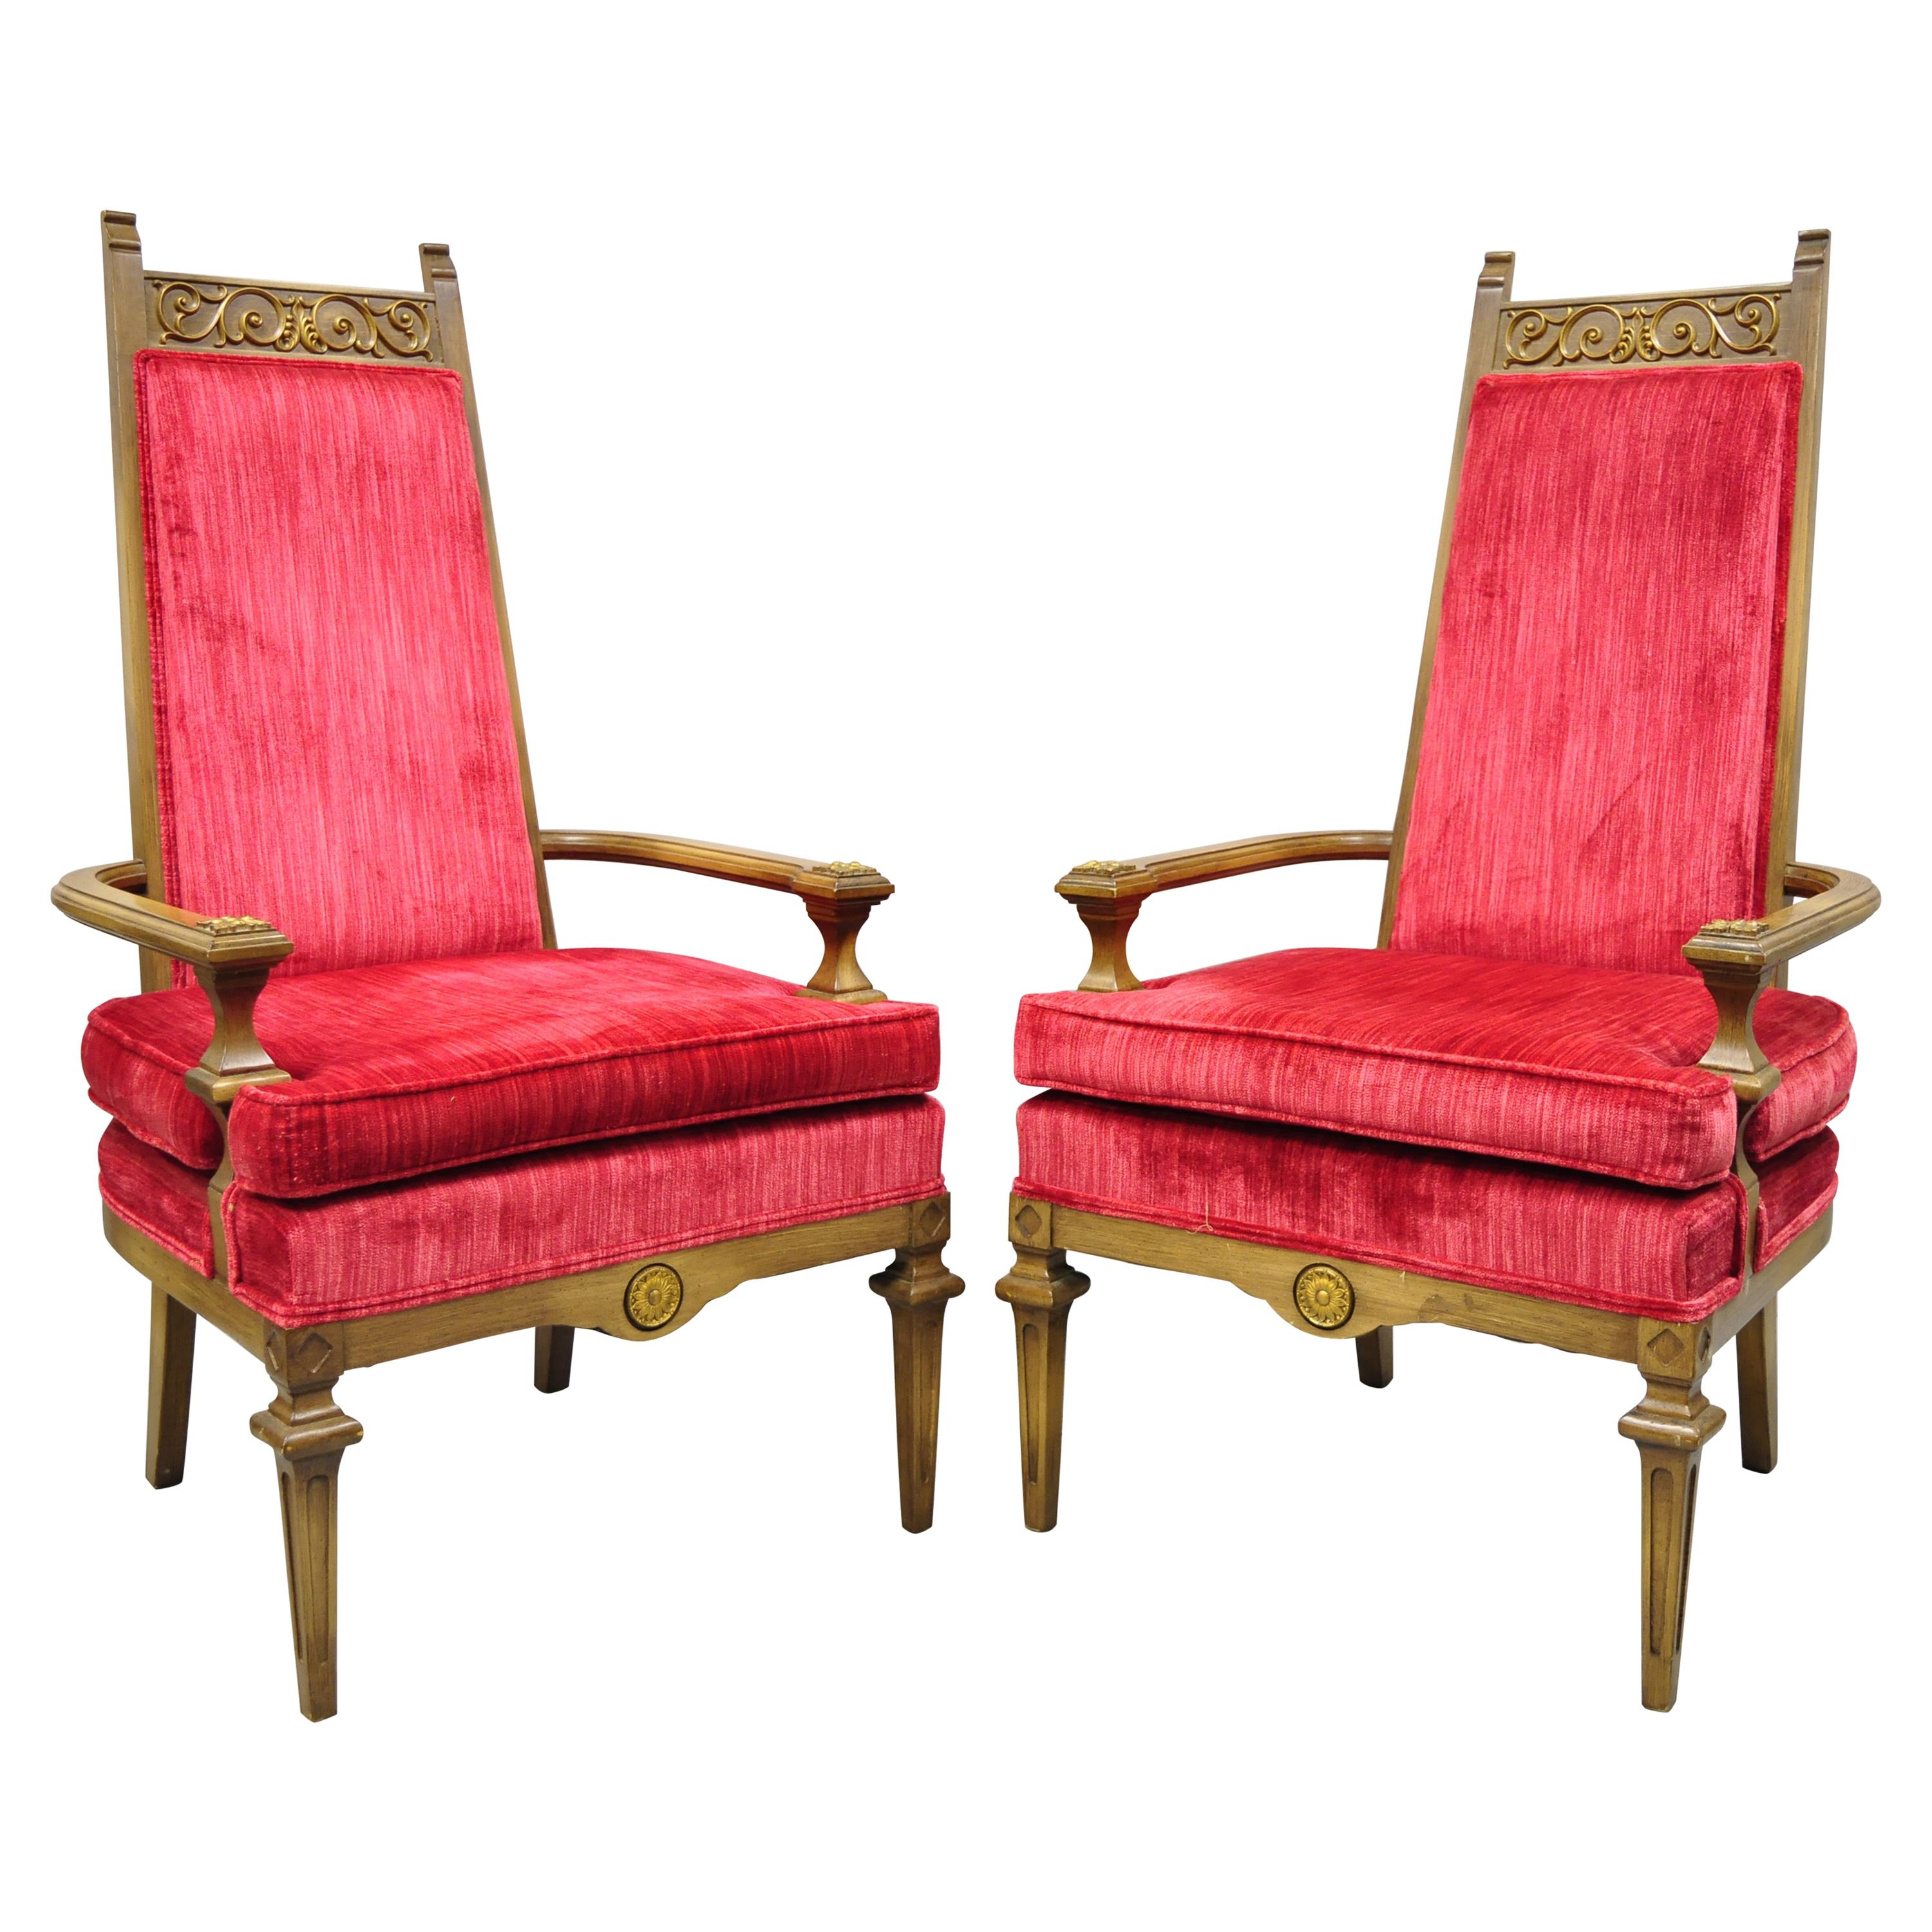 Vintage Italian Hollywood Regency Red High Back Lounge Arm Chairs, a Pair For Sale